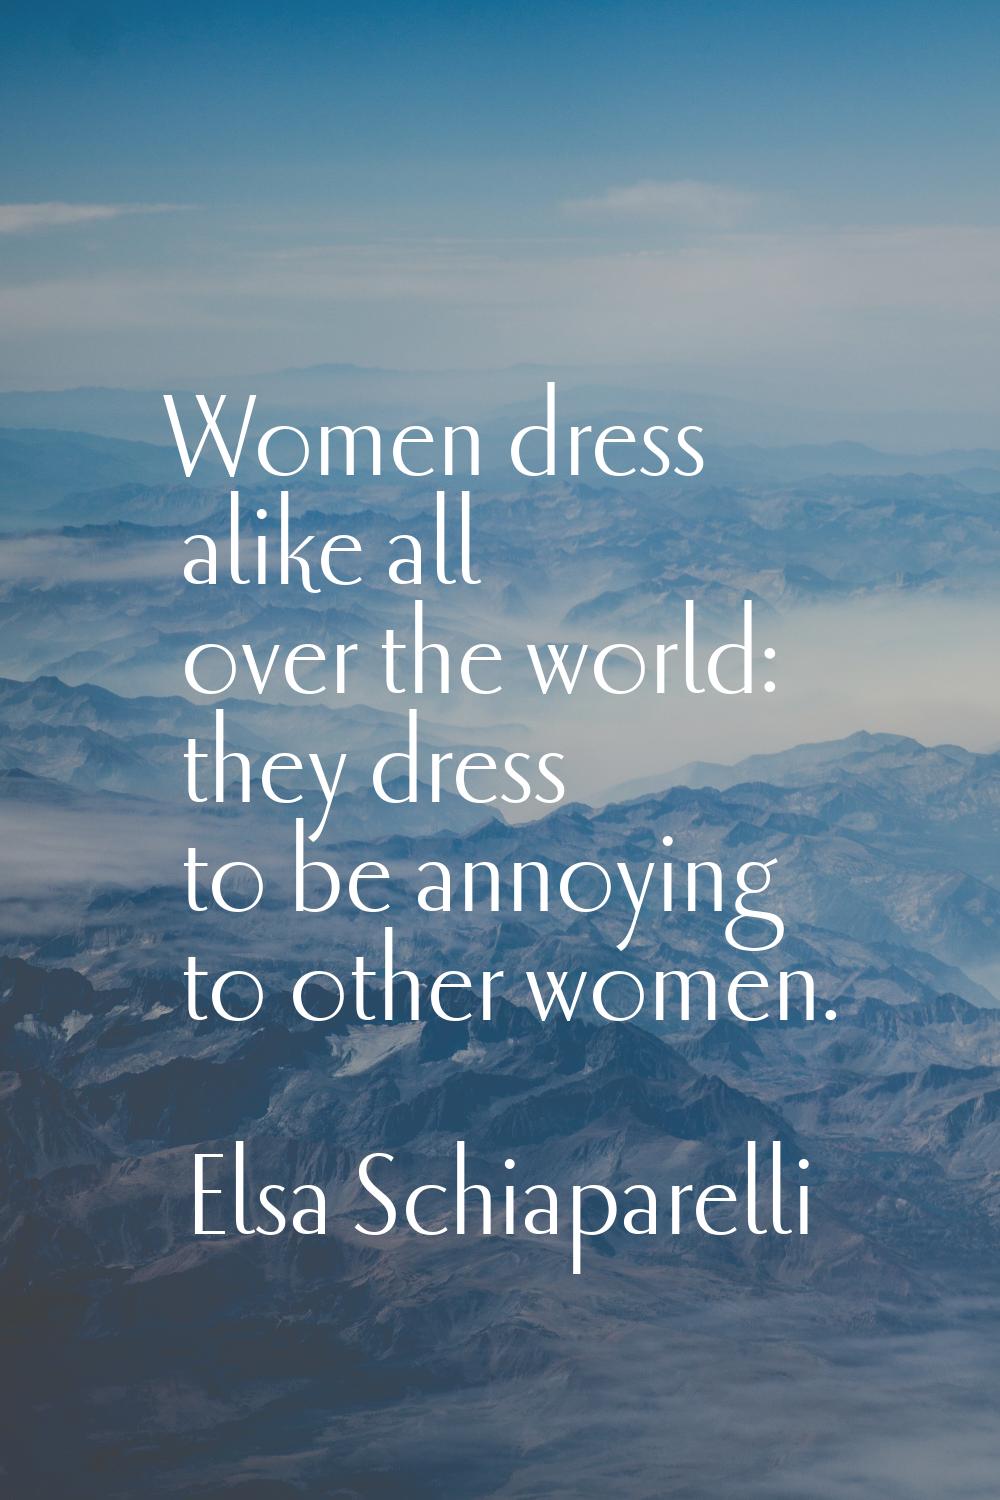 Women dress alike all over the world: they dress to be annoying to other women.